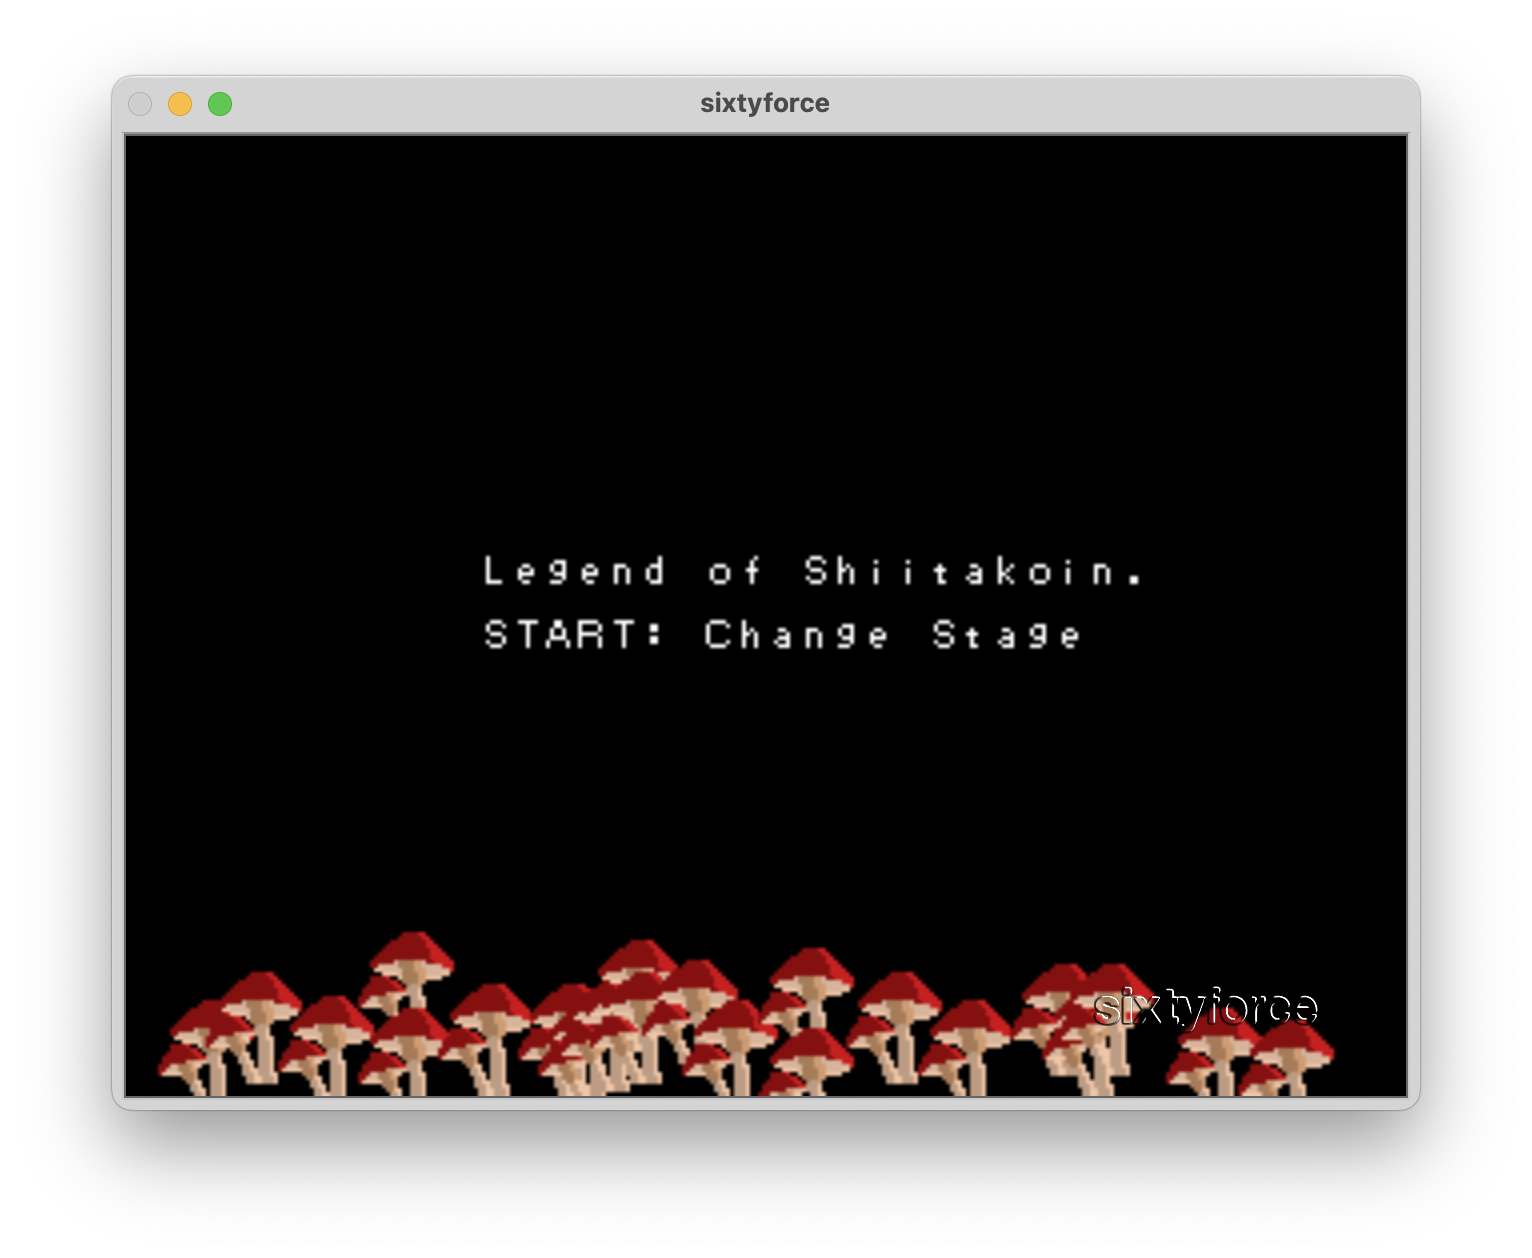 A picture of the SixtyForce N64 emulator running the Legend of Shiitakoin ROM. There's red mushrooms lining the bottom of the screen, and the text "Legend of Shiitakoin\nSTART: Change Stage" is centred.